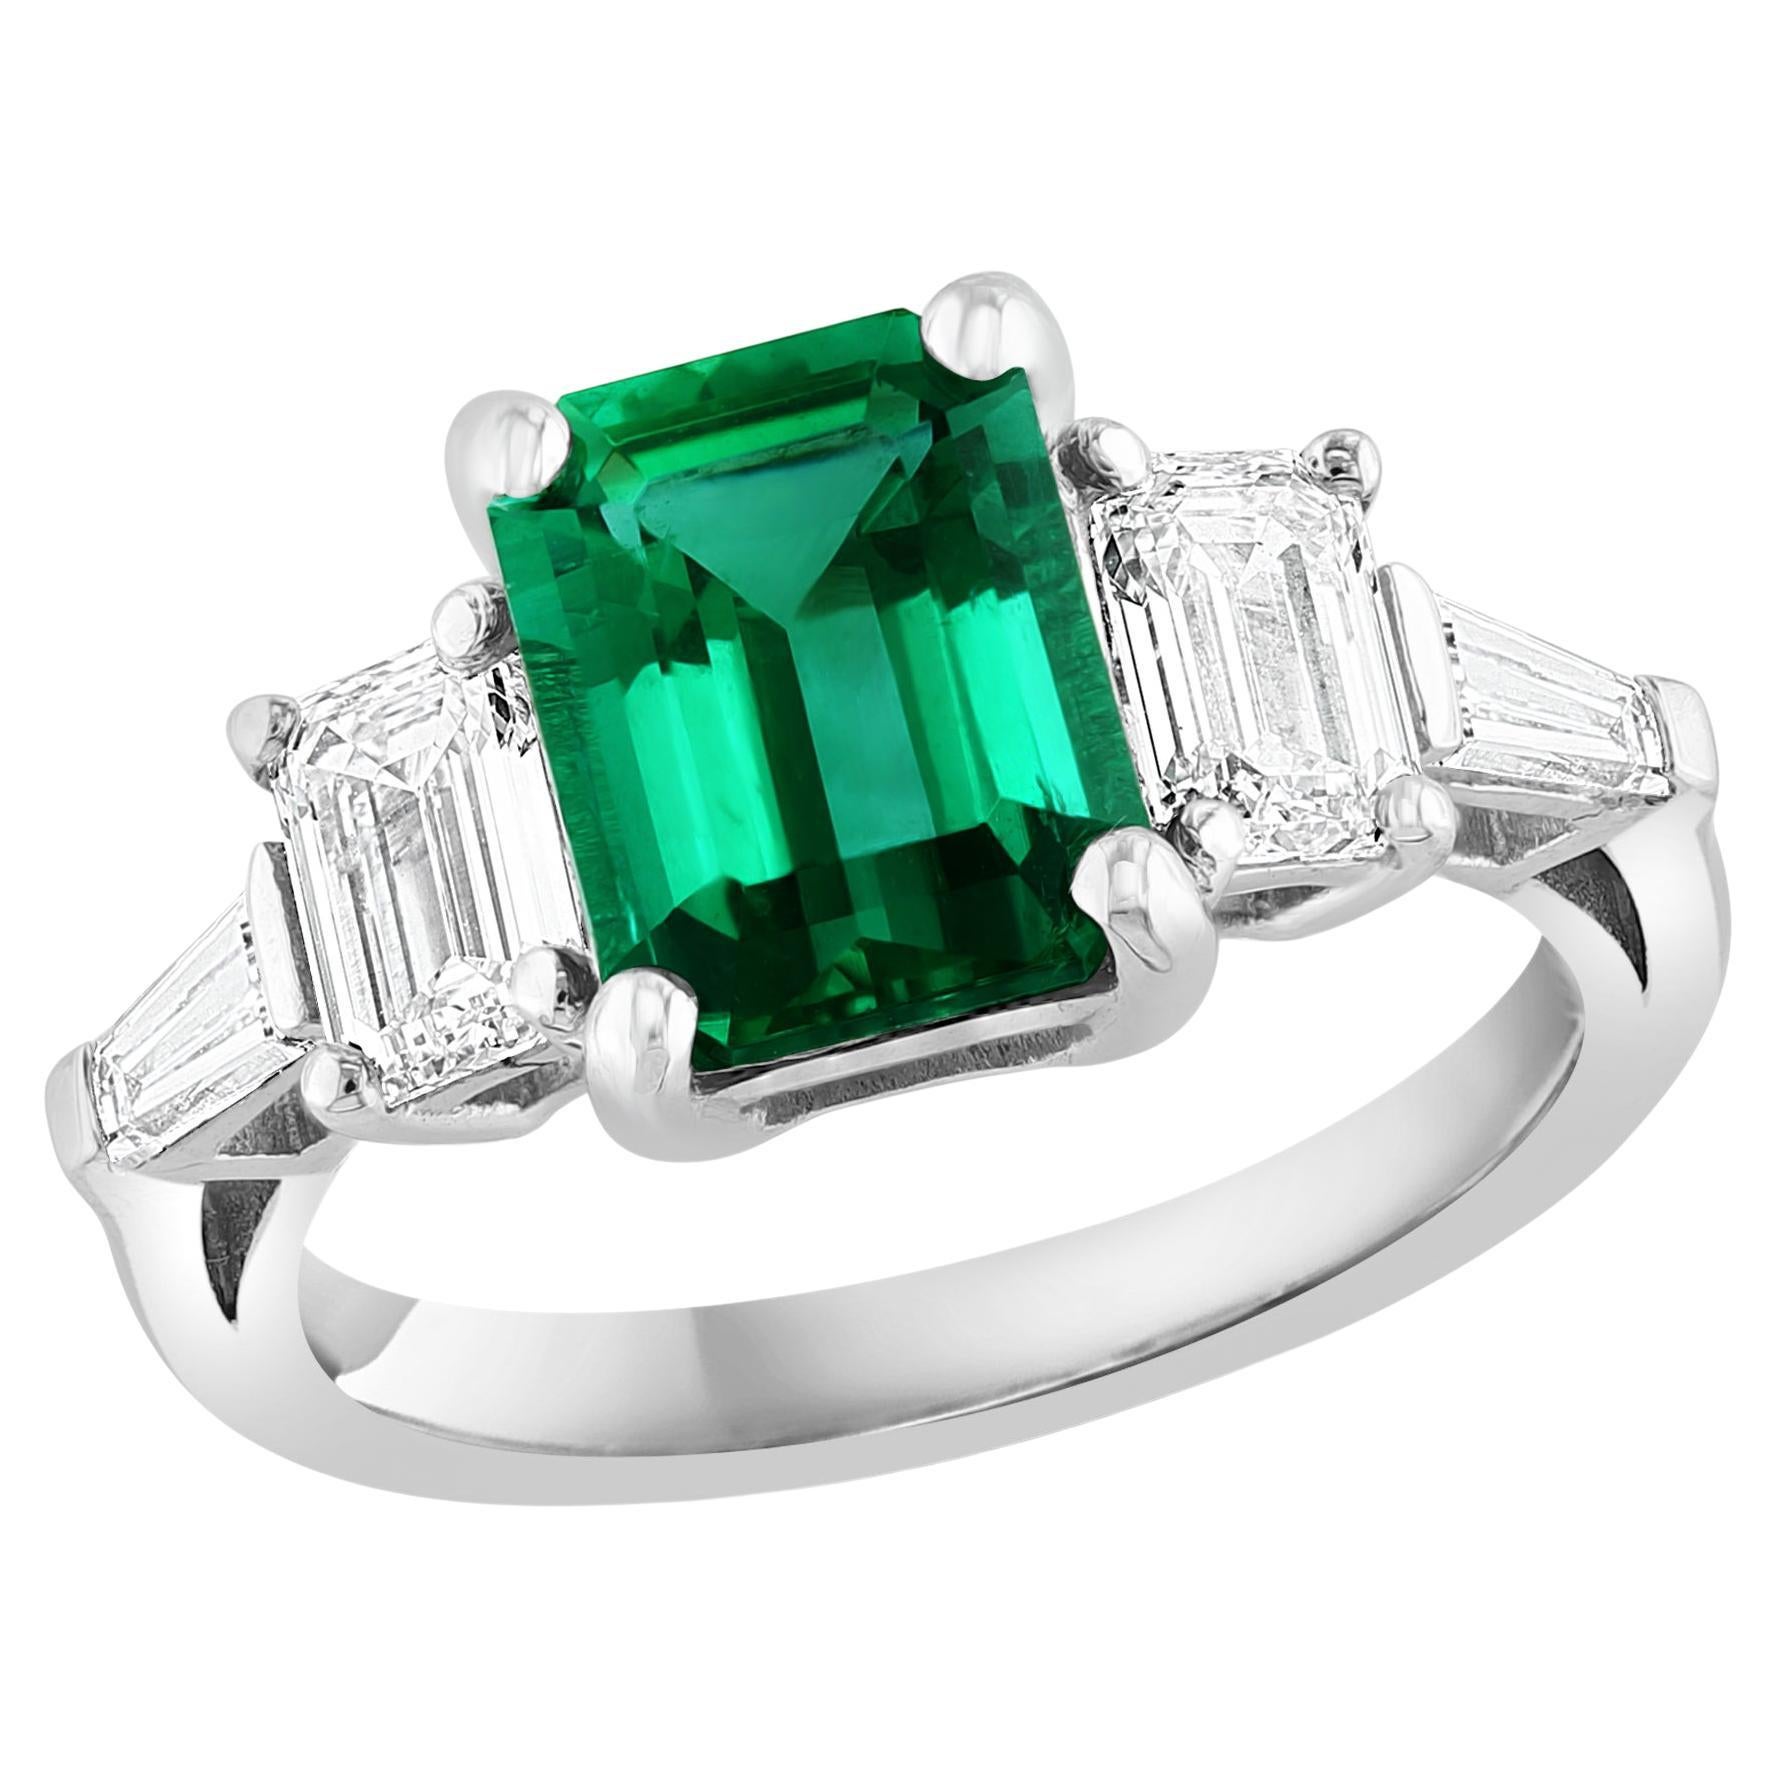 Certified 2.22 Carat Emerald Cut Emerald and Diamond Five-Stone Engagement Ring For Sale